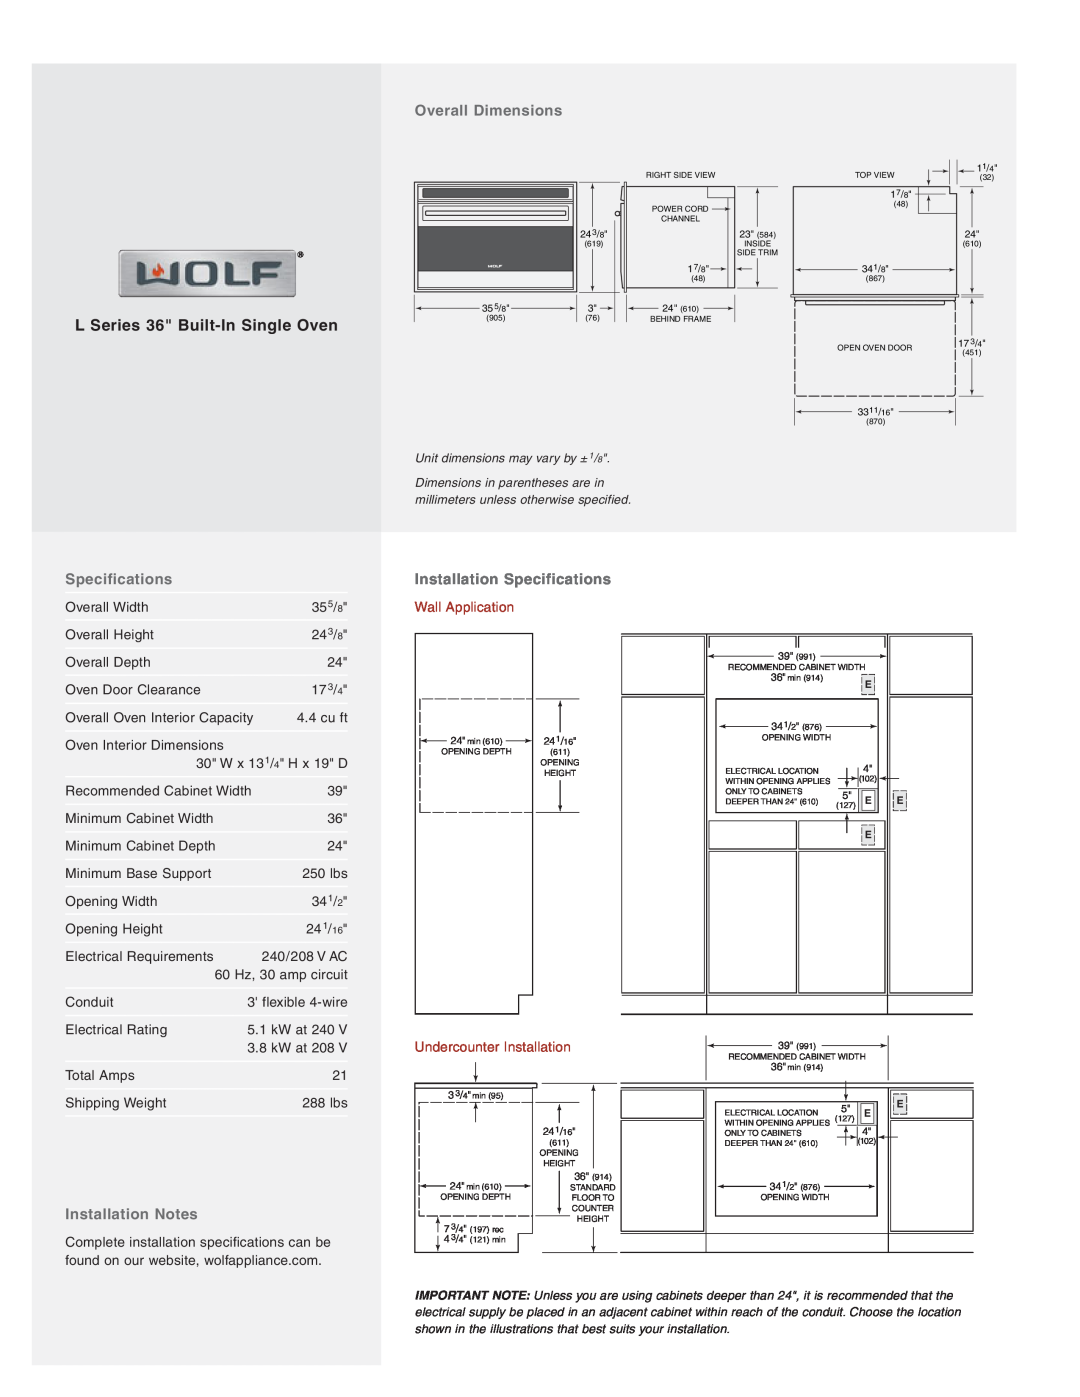 Wolf Appliance Company SO36U Overall Dimensions, Installation Notes, Installation Specifications, Wall Application 